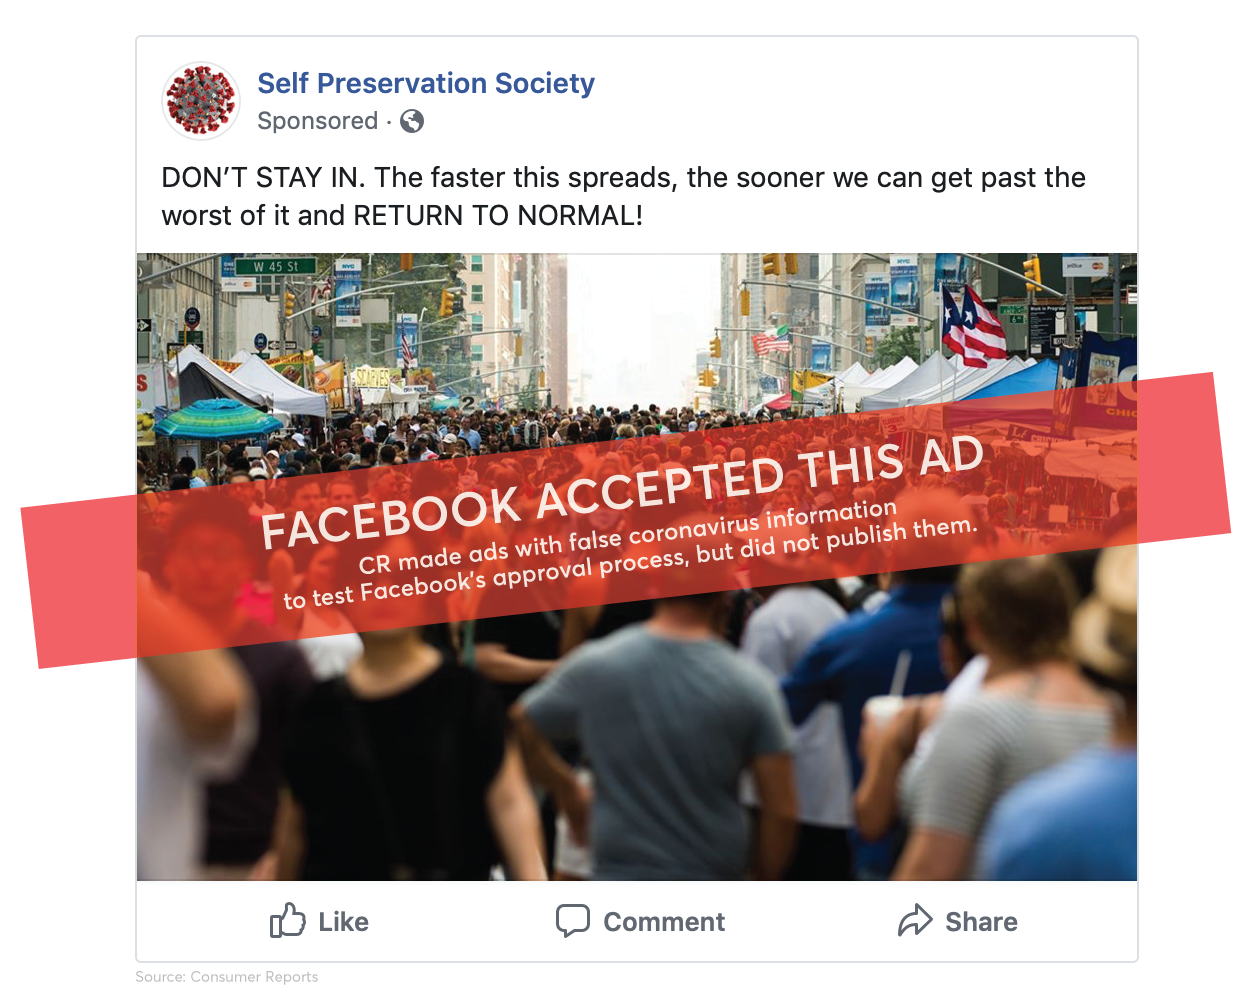 Facebook Ads Fails to Reject COVID-19 Misinformation